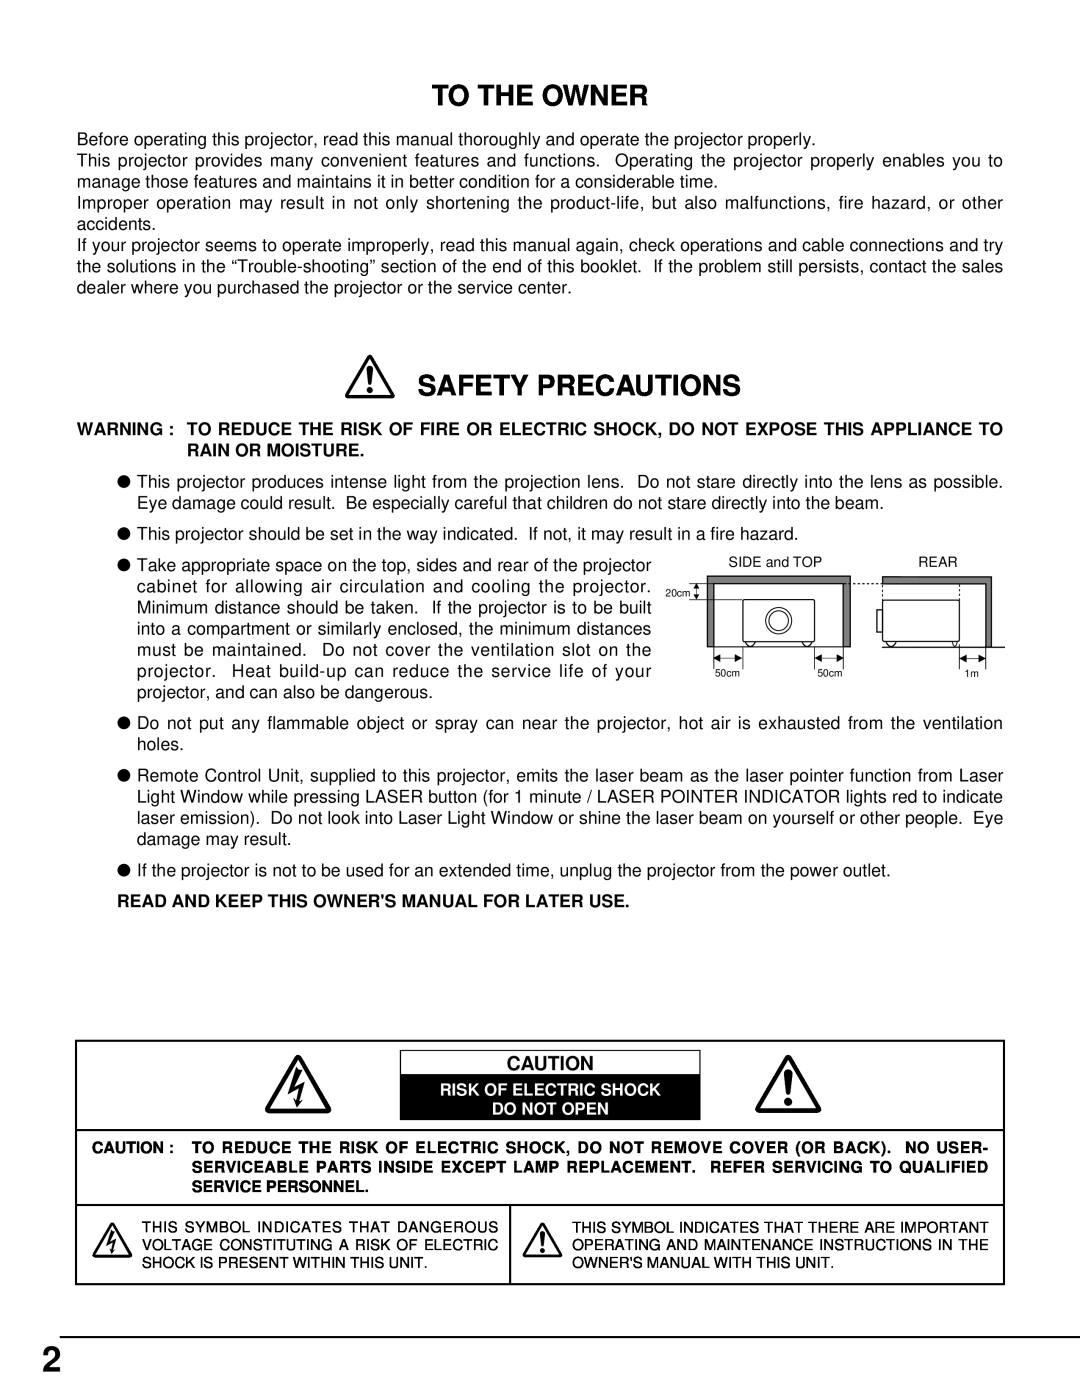 Eiki LC-XT2 instruction manual To The Owner, Safety Precautions, Risk Of Electric Shock Do Not Open 